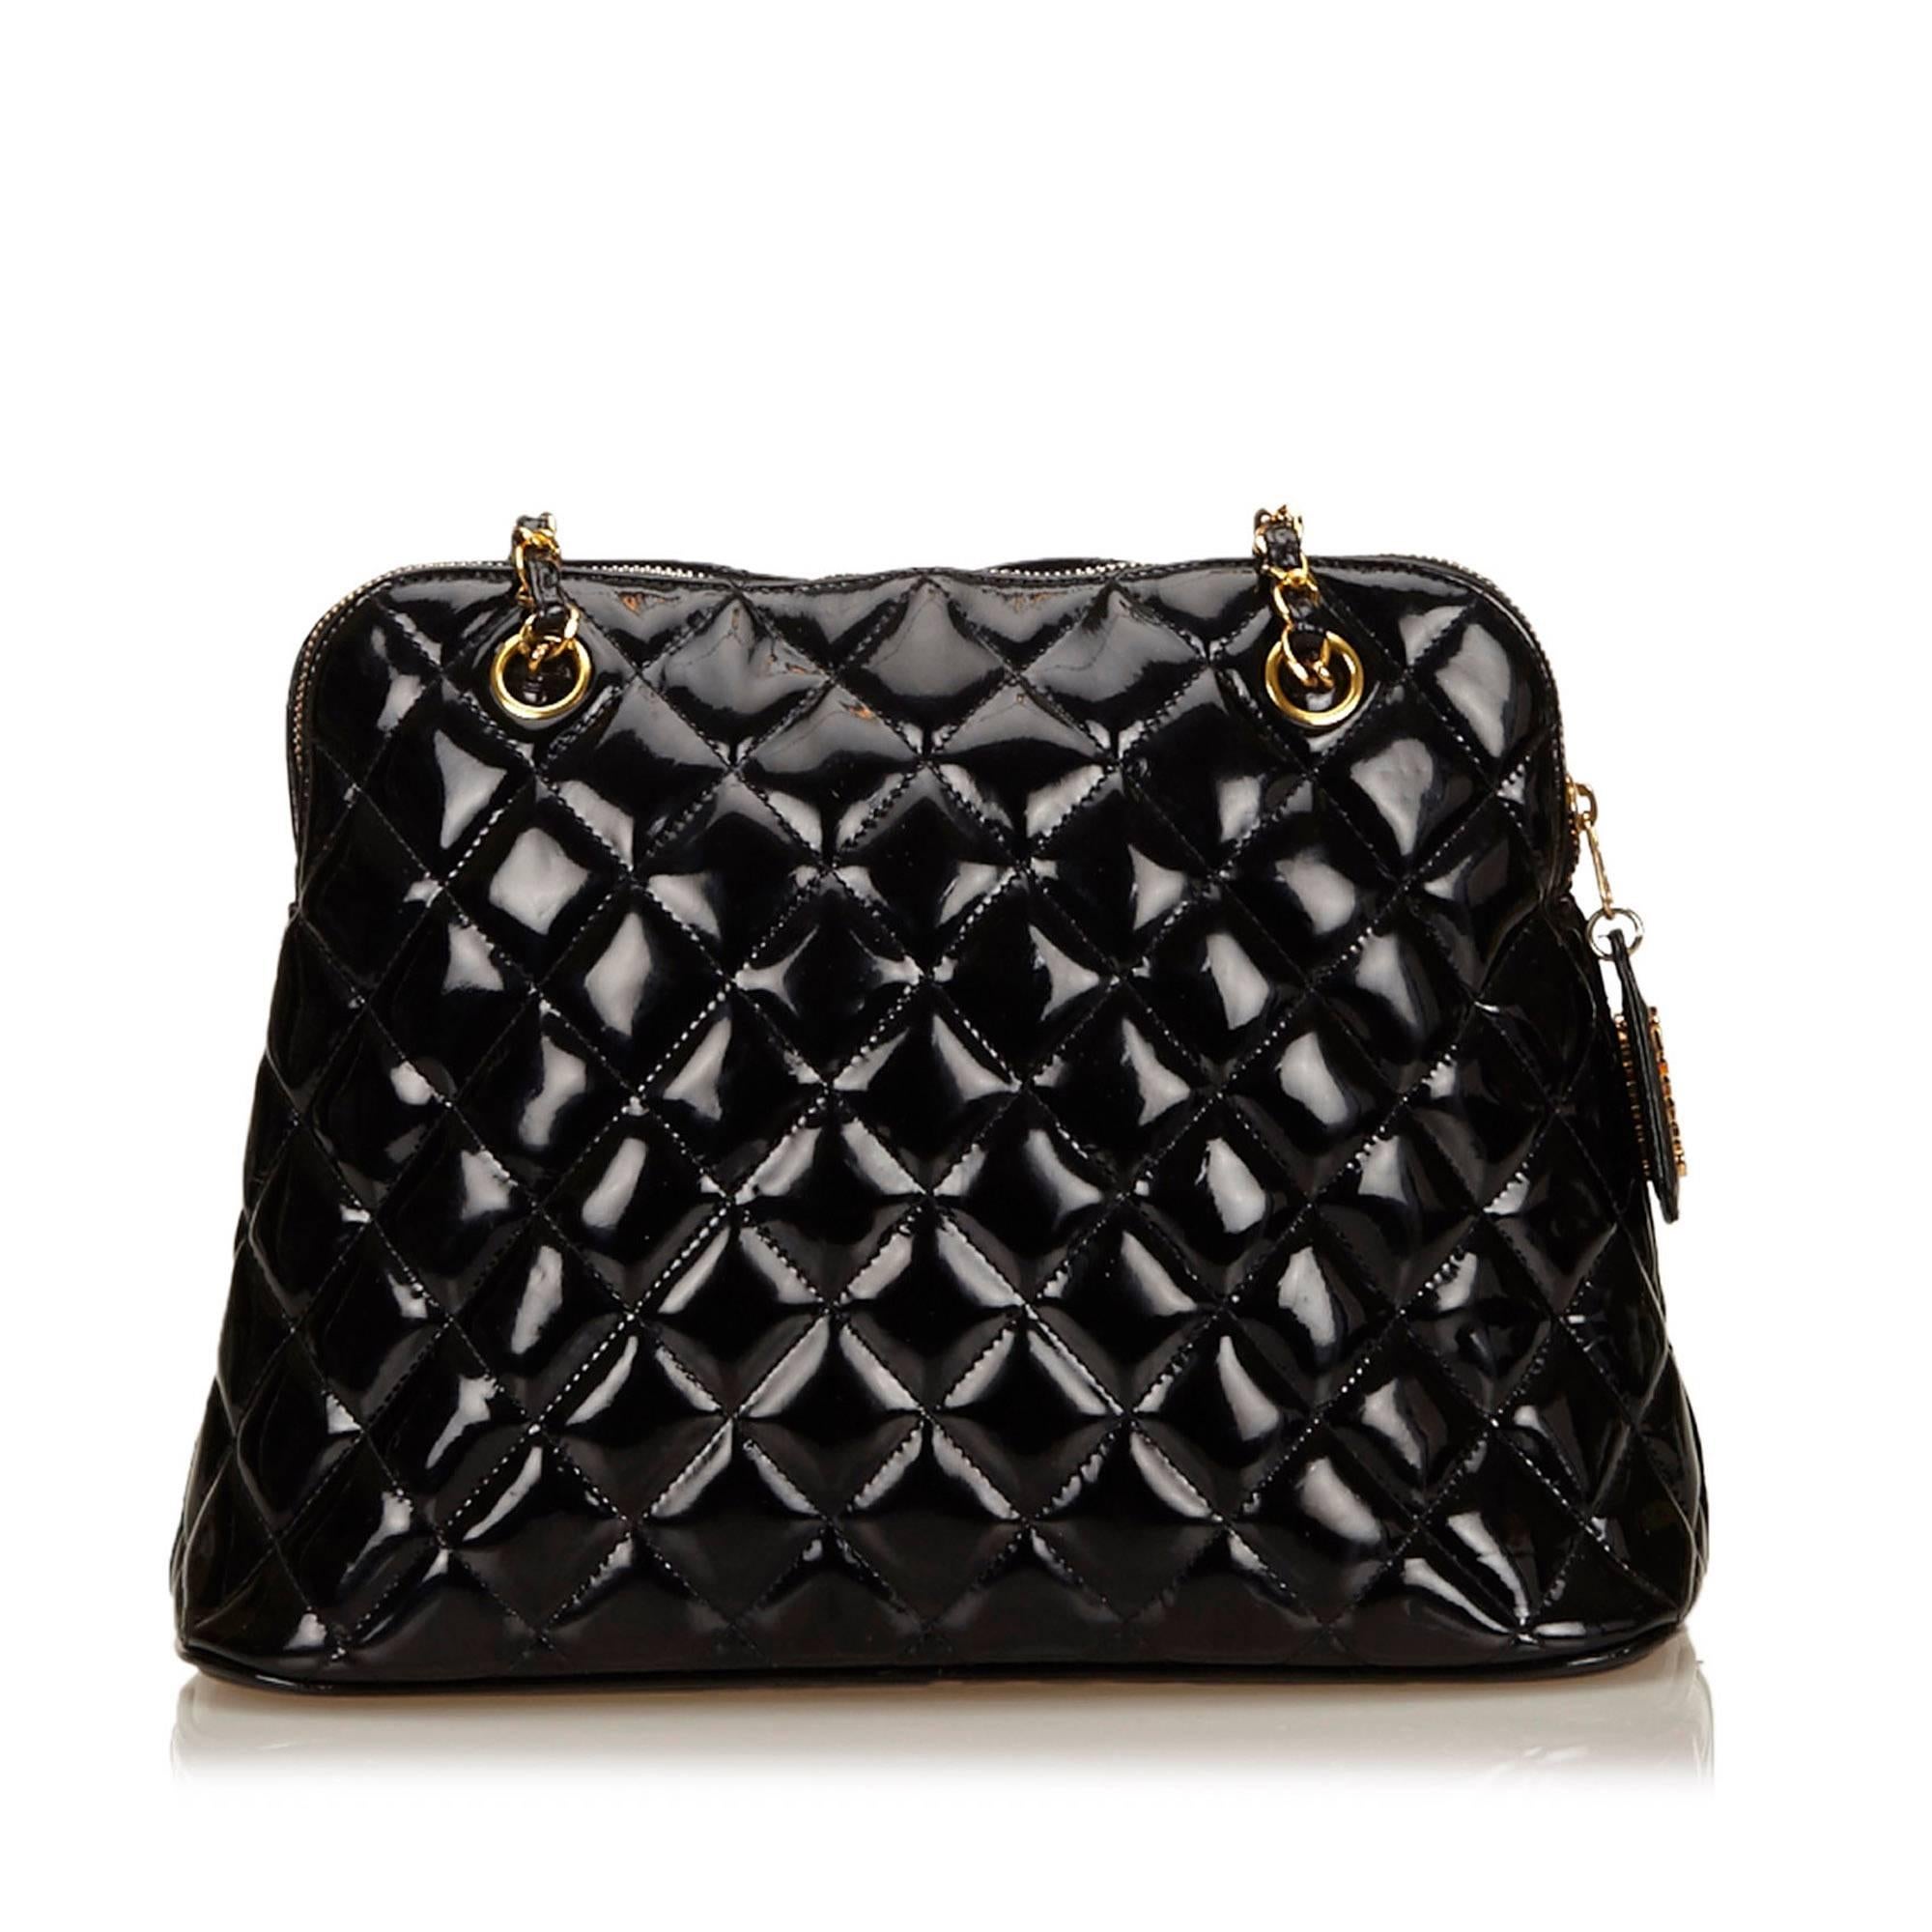 Product details: Black quilted Matelasse patent leather shoulder bag by Chanel. Dual chain and leather shoulder straps. Top zip closure. Leather lined interior with inner zip pocket. Logo embossed flat bottom. Goldtone hardware. Dust bag included.